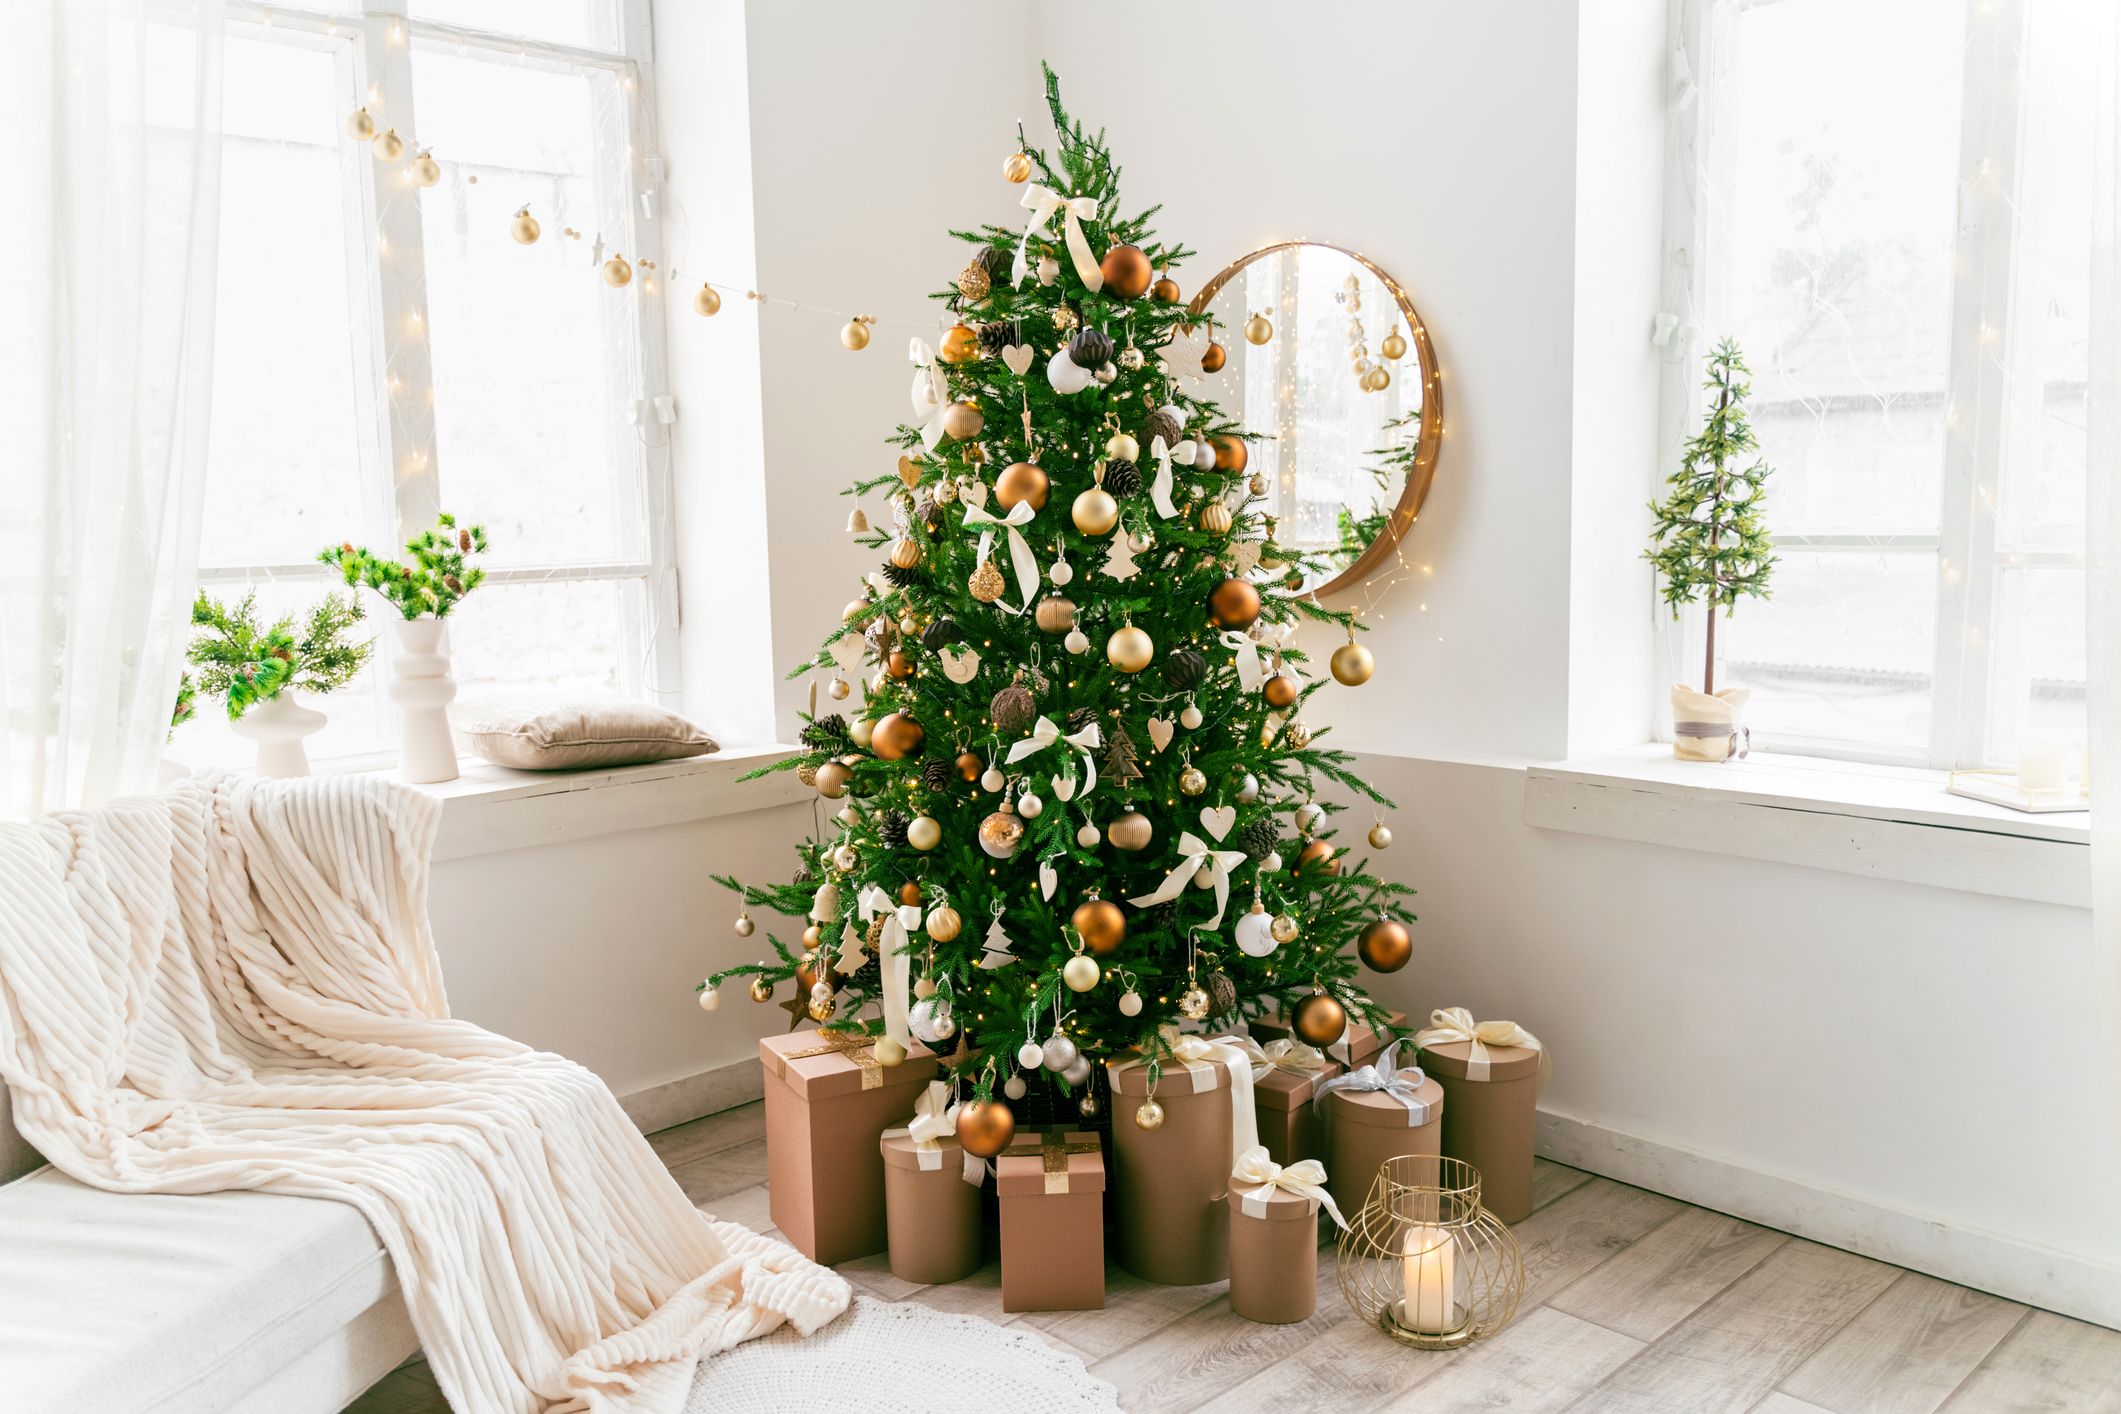 Are You Ready to Host Holiday Guests This Year?